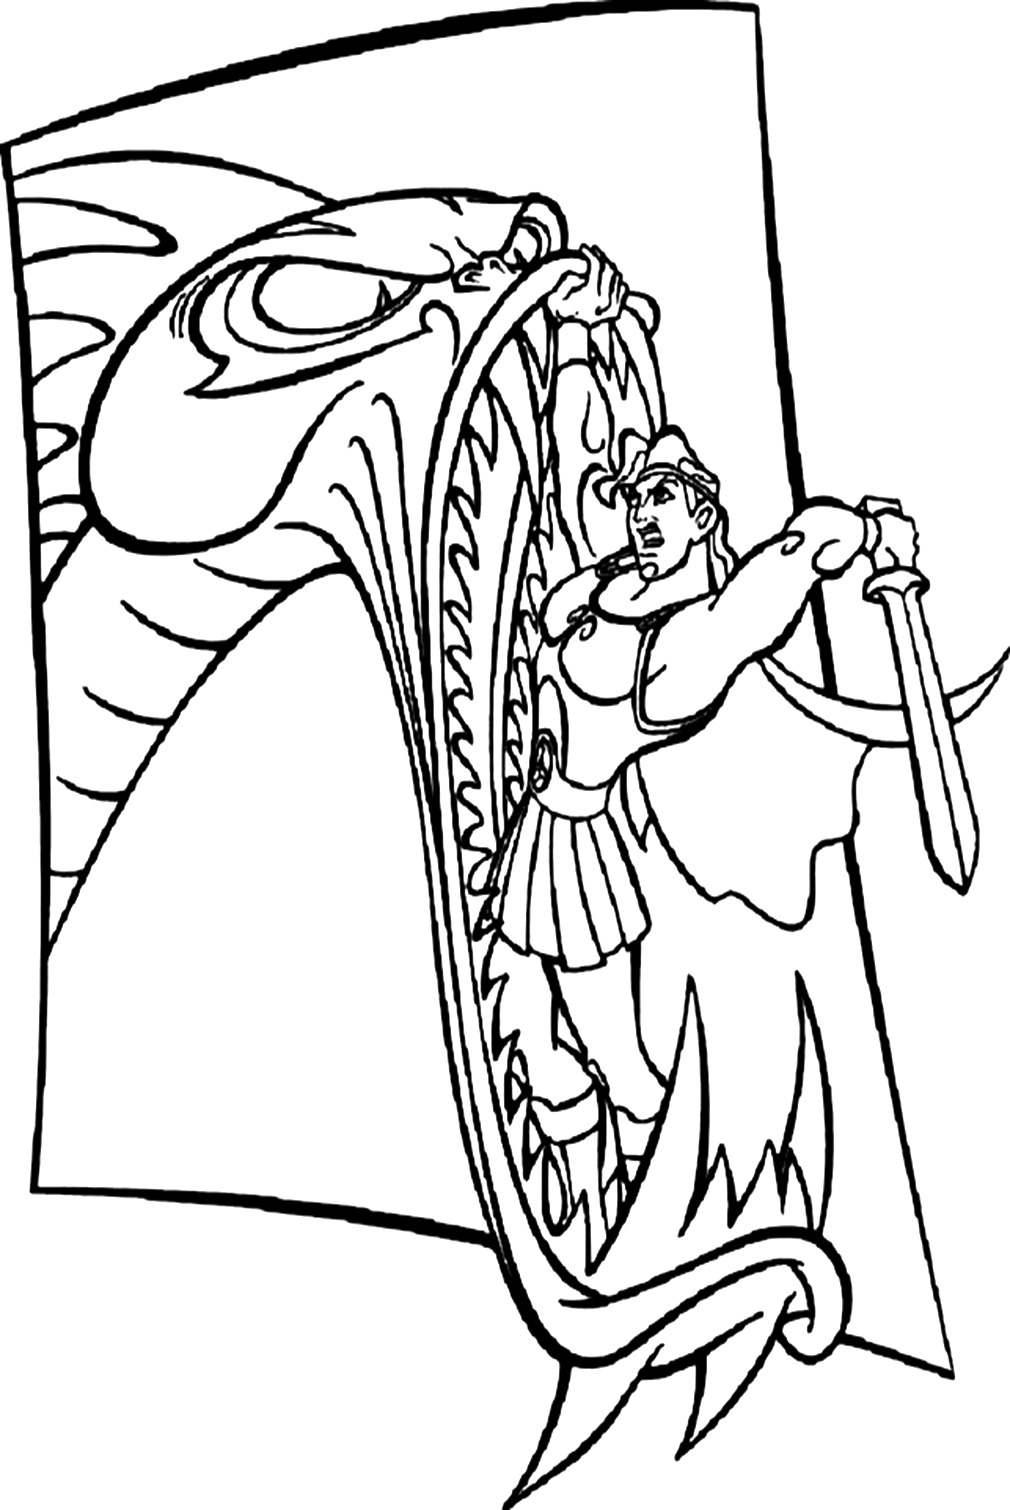 Hydra Coloring Sheet Coloring Pages